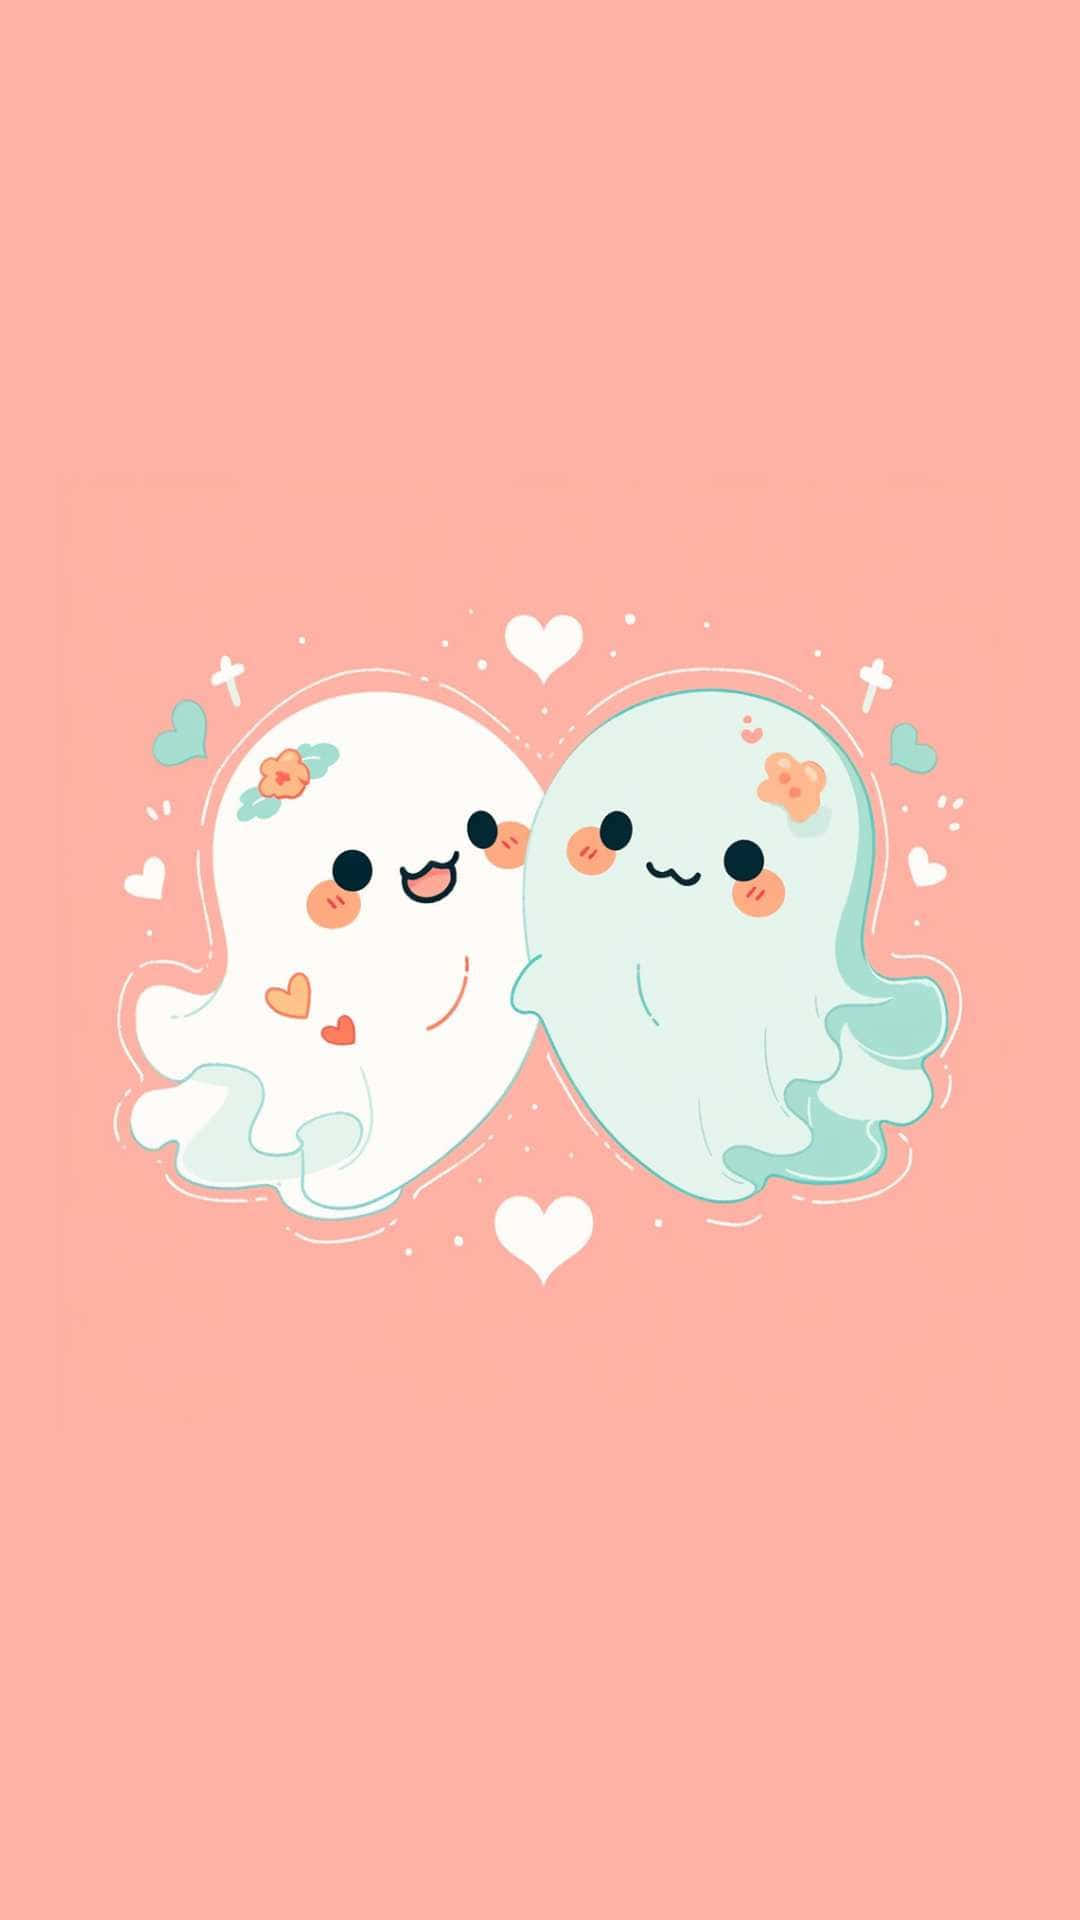 Adorable_ Ghost_ Couple_ Illustration Wallpaper